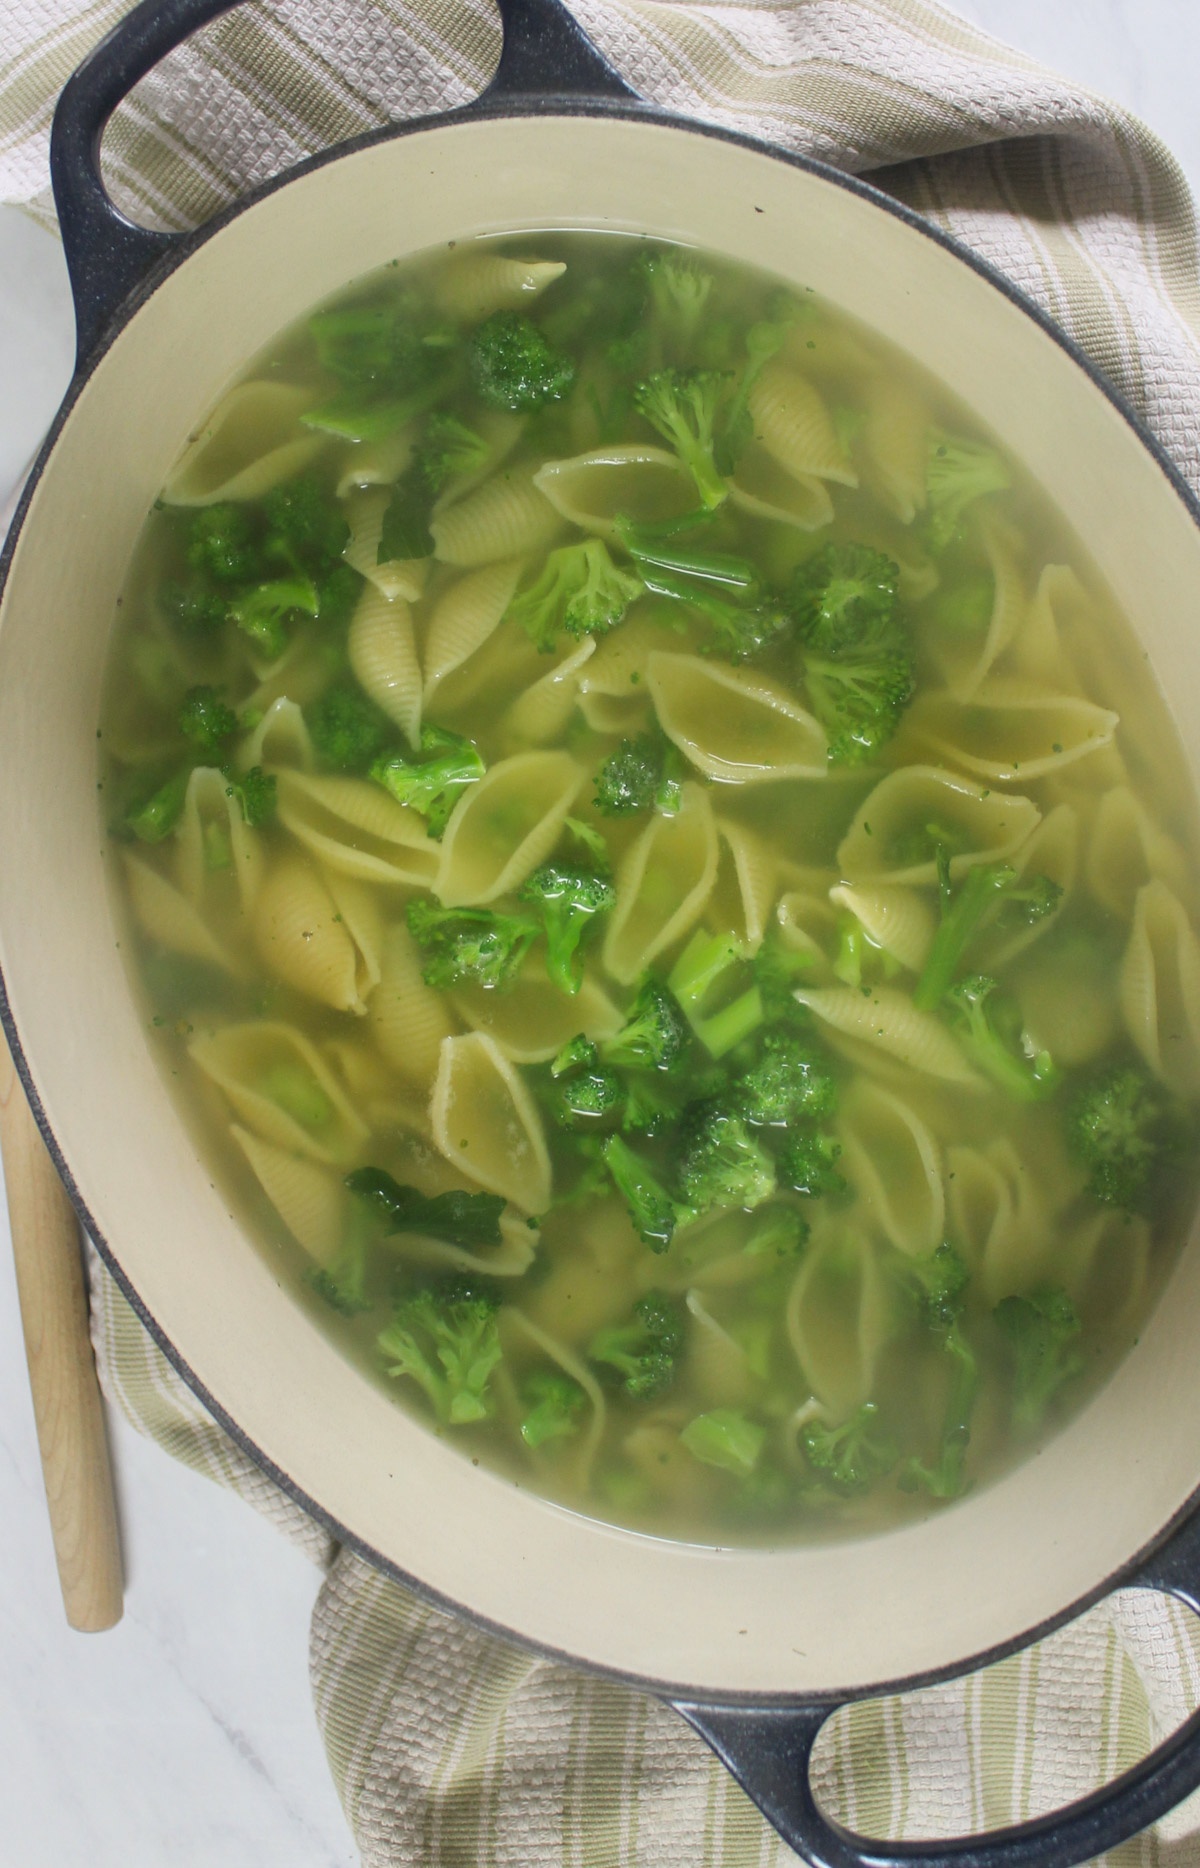 Large pasta shells and chopped broccoli boiling together to finish at the same time.